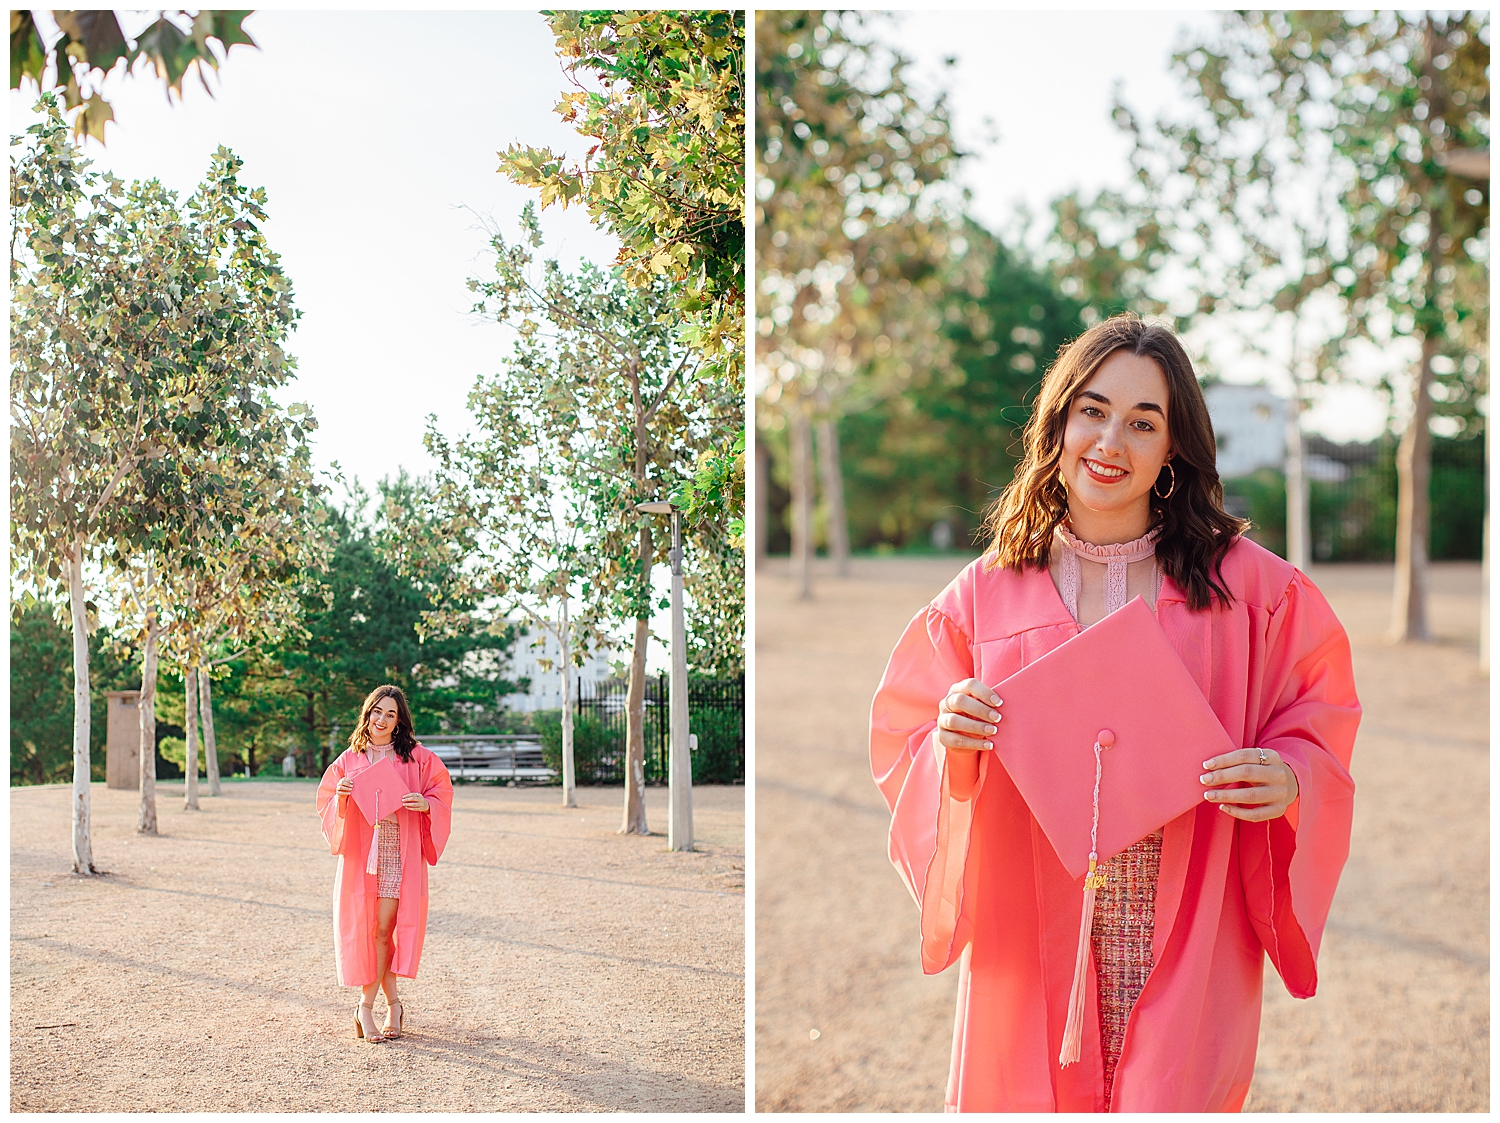 high school senior in pink graduation cap and gown standing in tree line downtown Houston